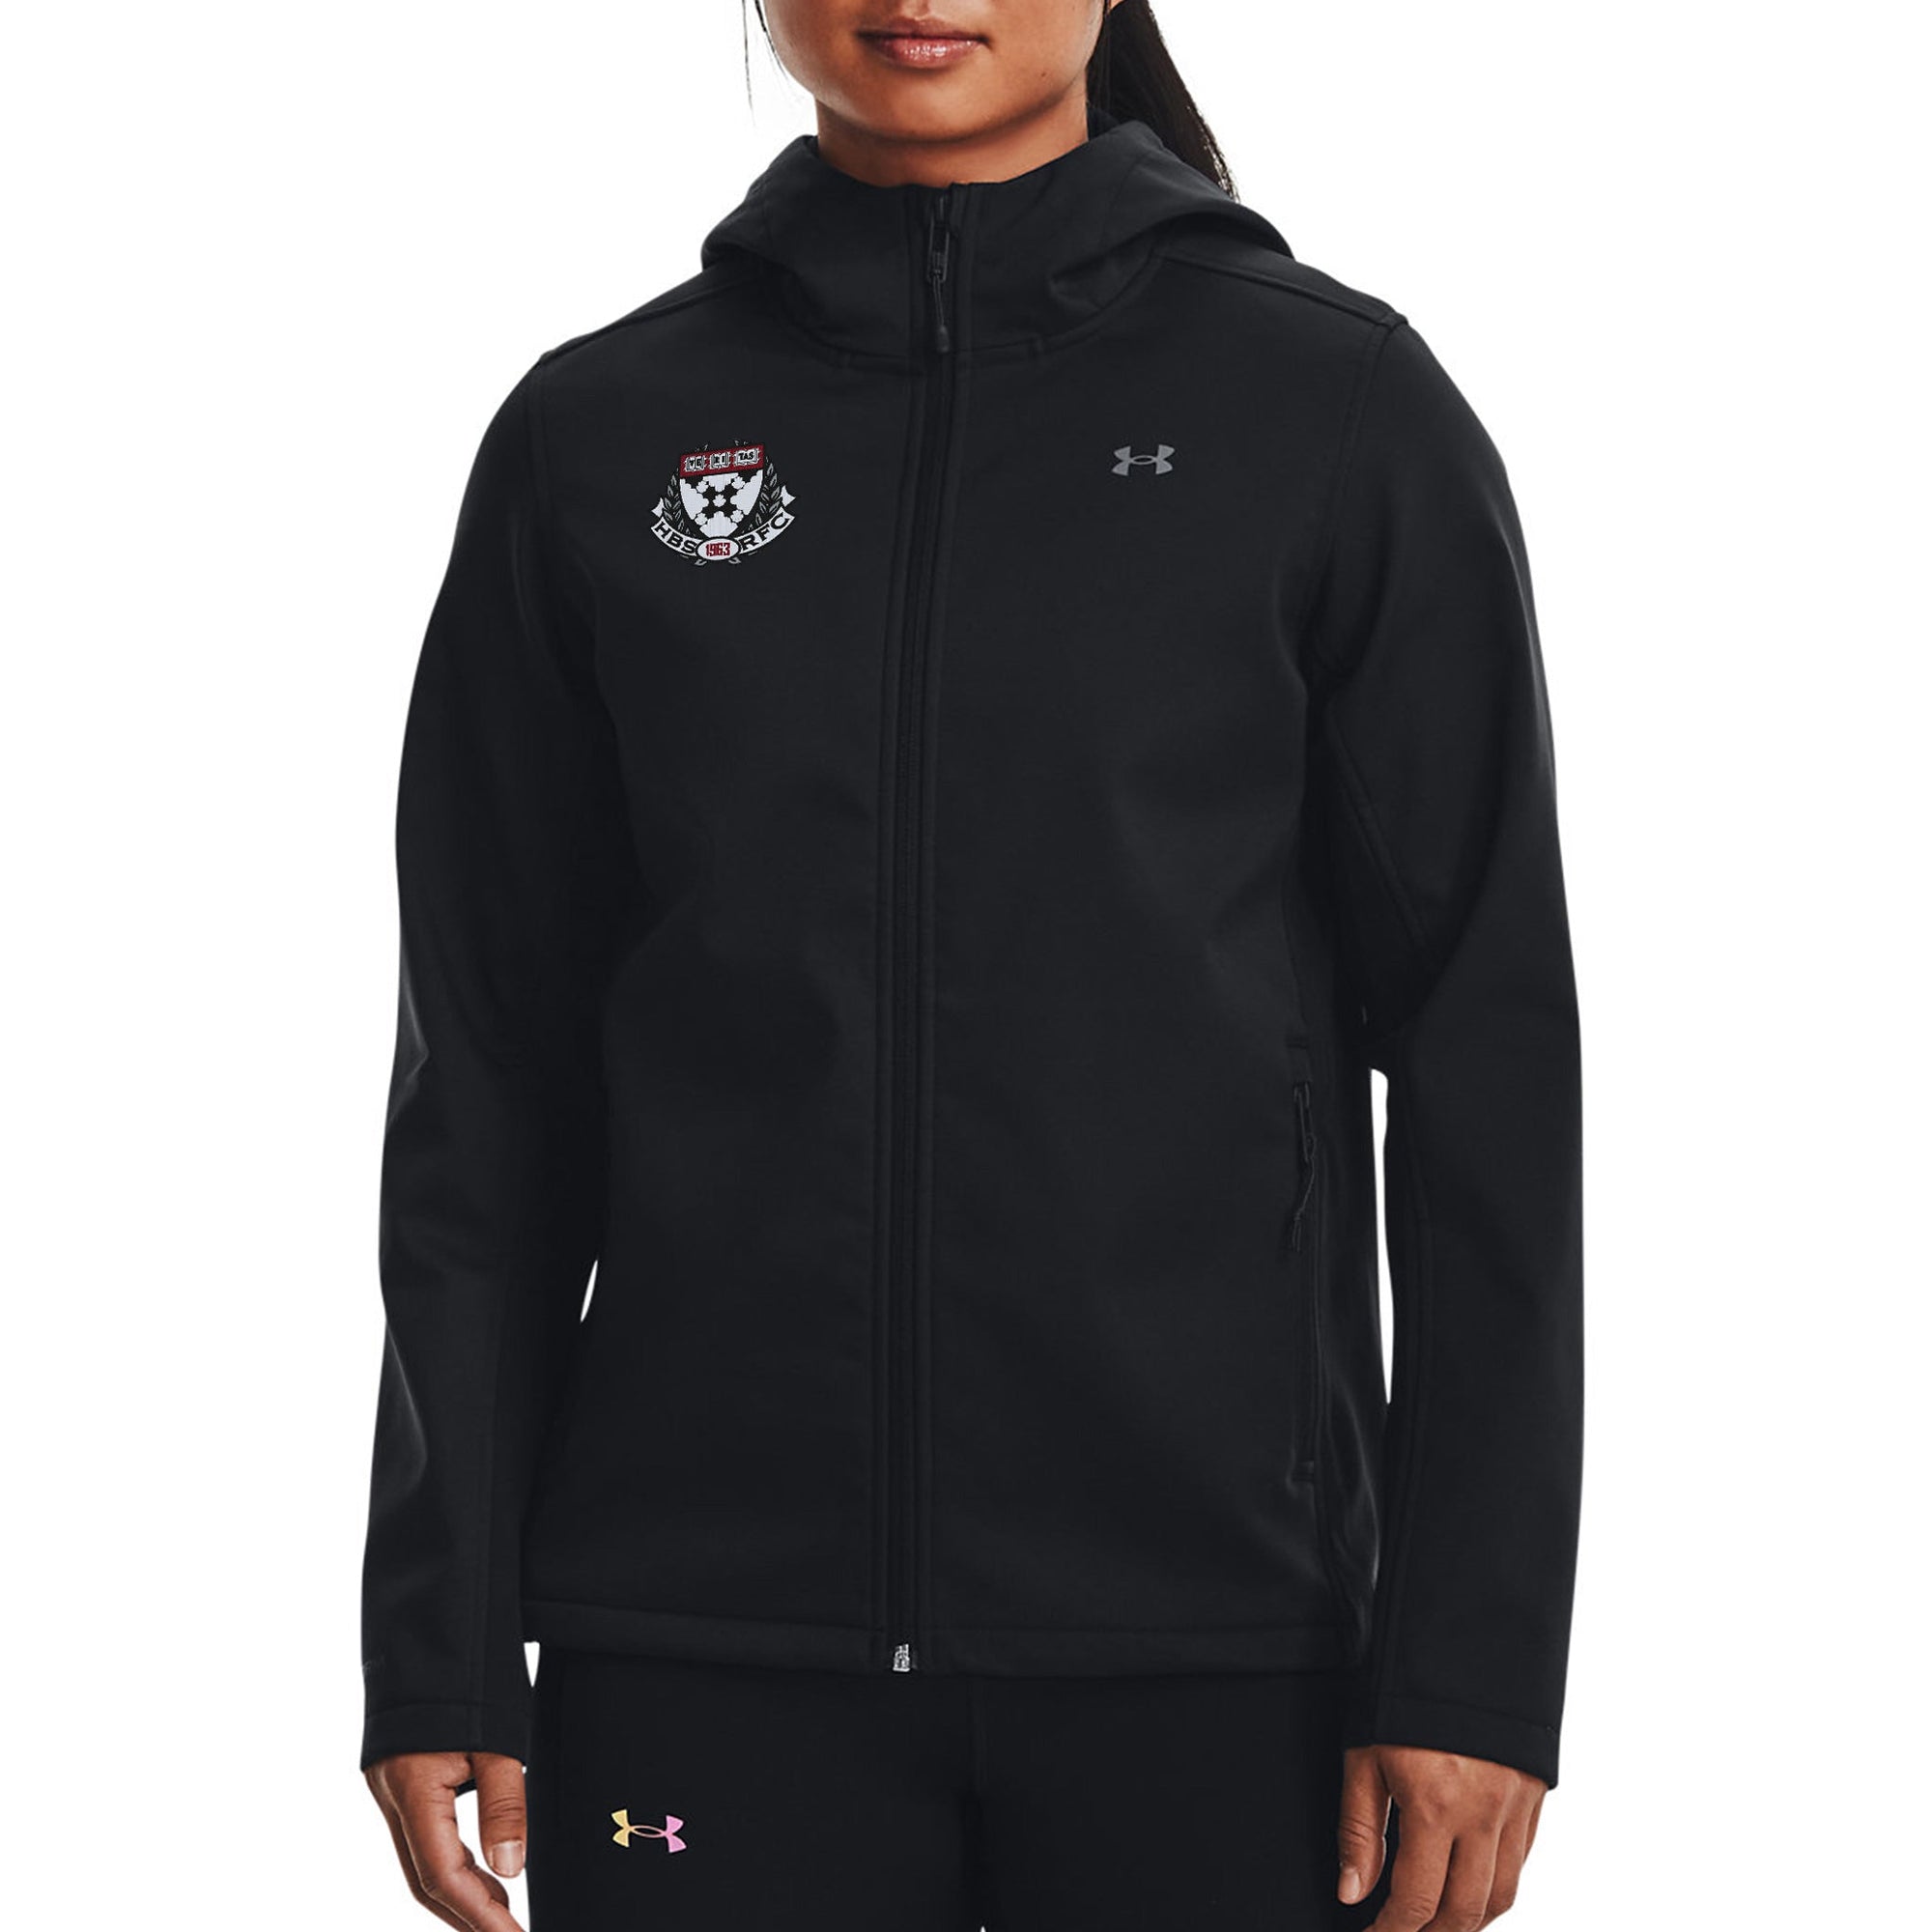 Rugby Imports HBS RFC Women's Coldgear Hooded Infrared Jacket